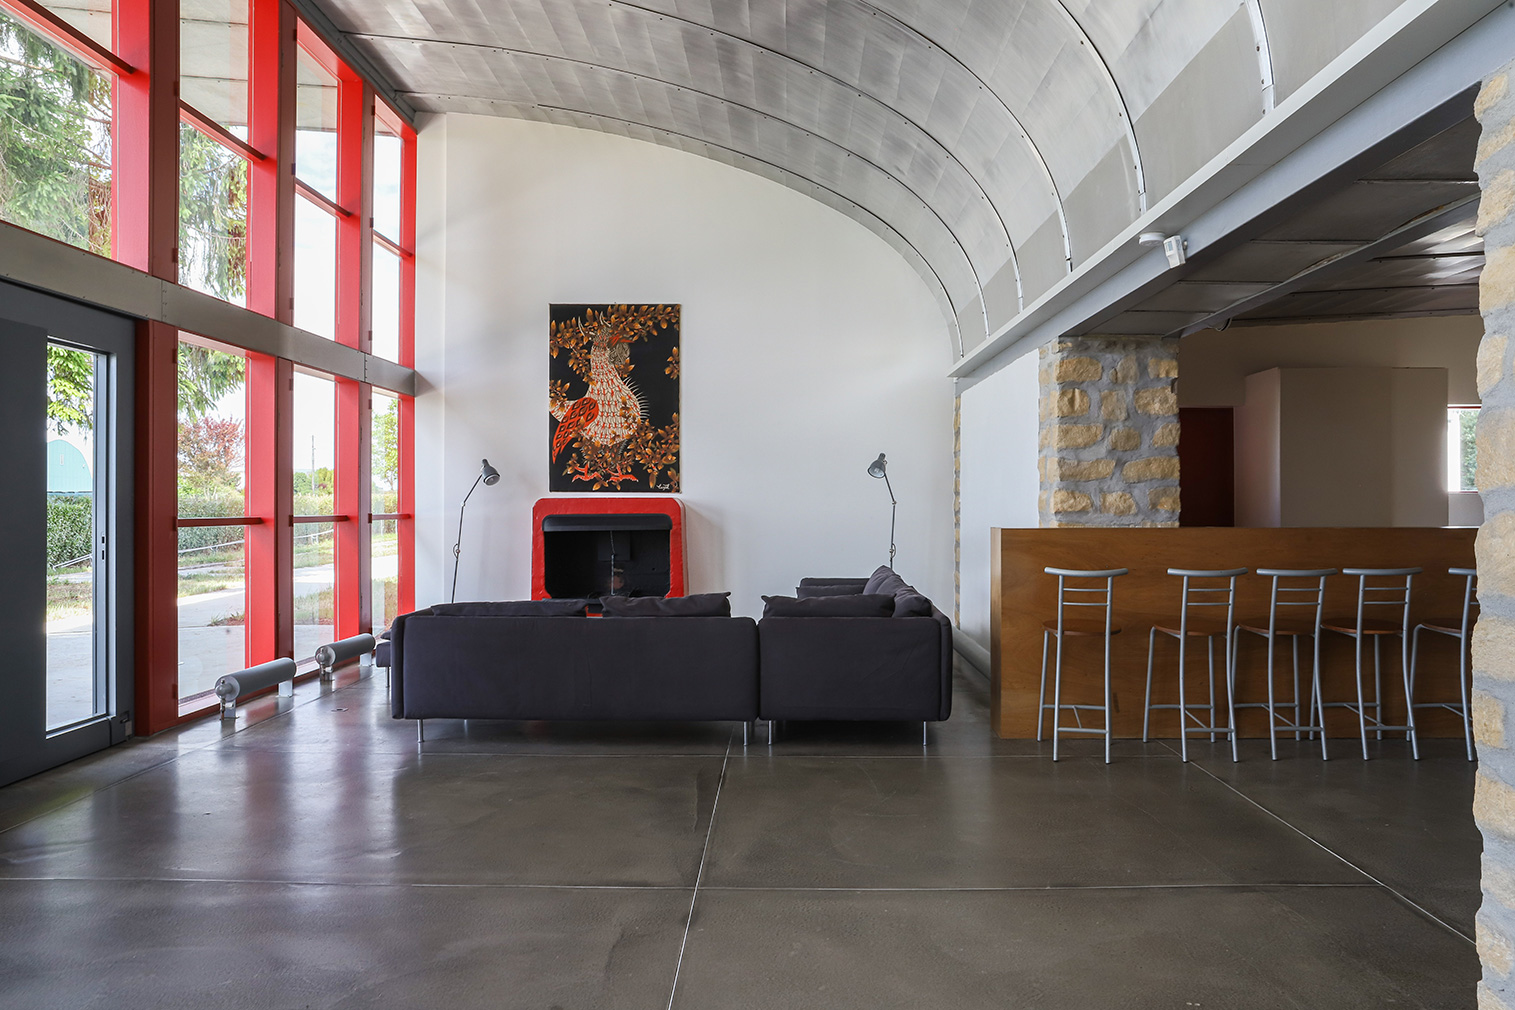  Stay in a former aerodrome clubhouse designed by Prouve and Le Corbusier